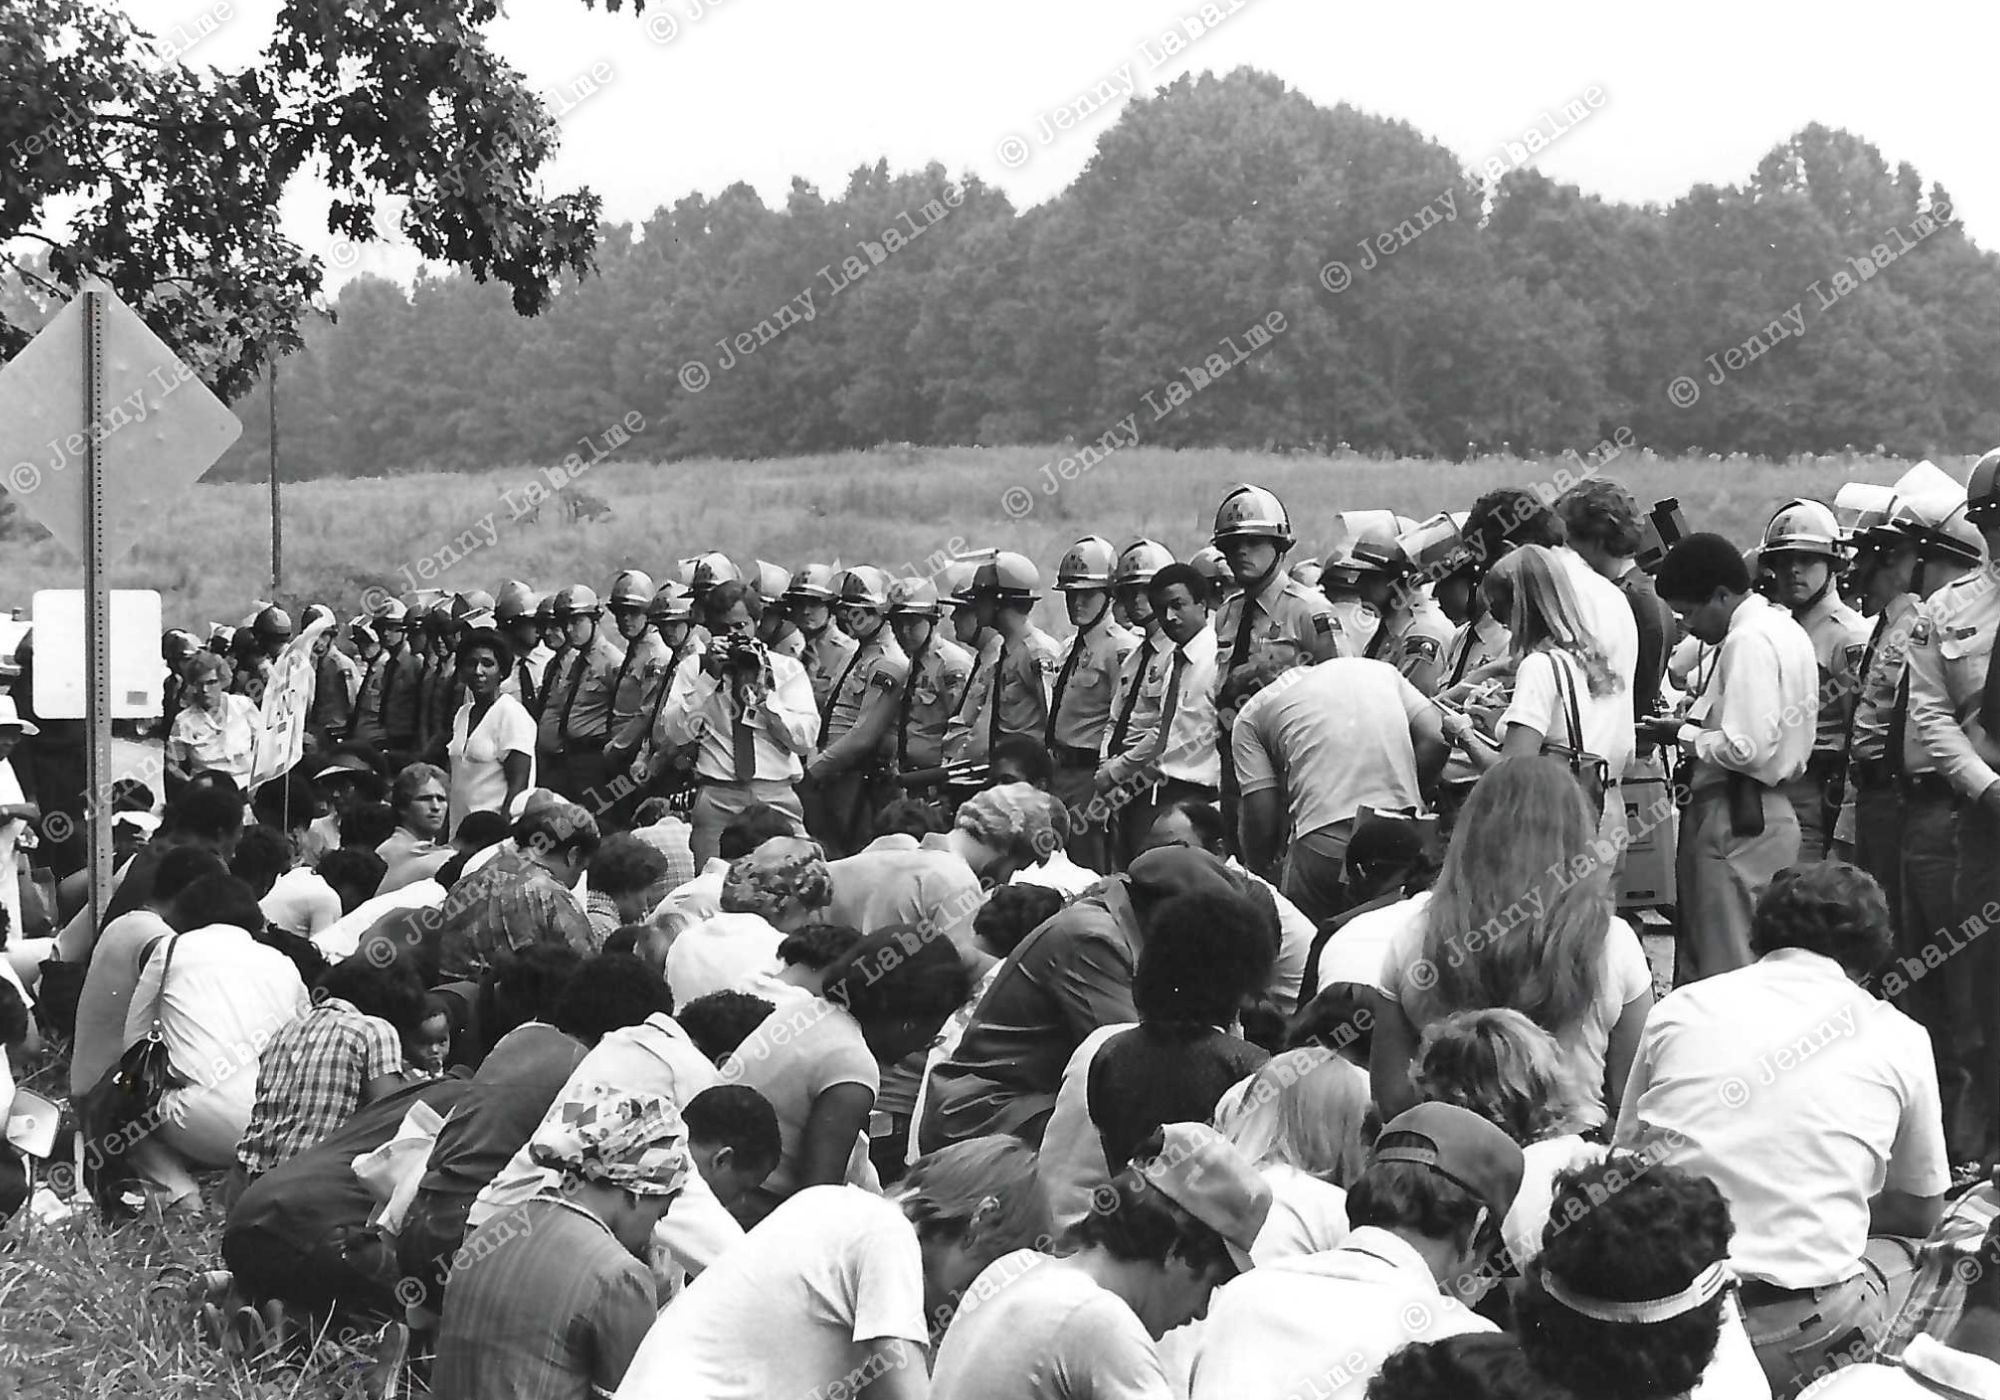 Lines of helmeted North Carolina state troopers holding billy clubs were intimidating. Protesters always knelt in prayer before being arrested